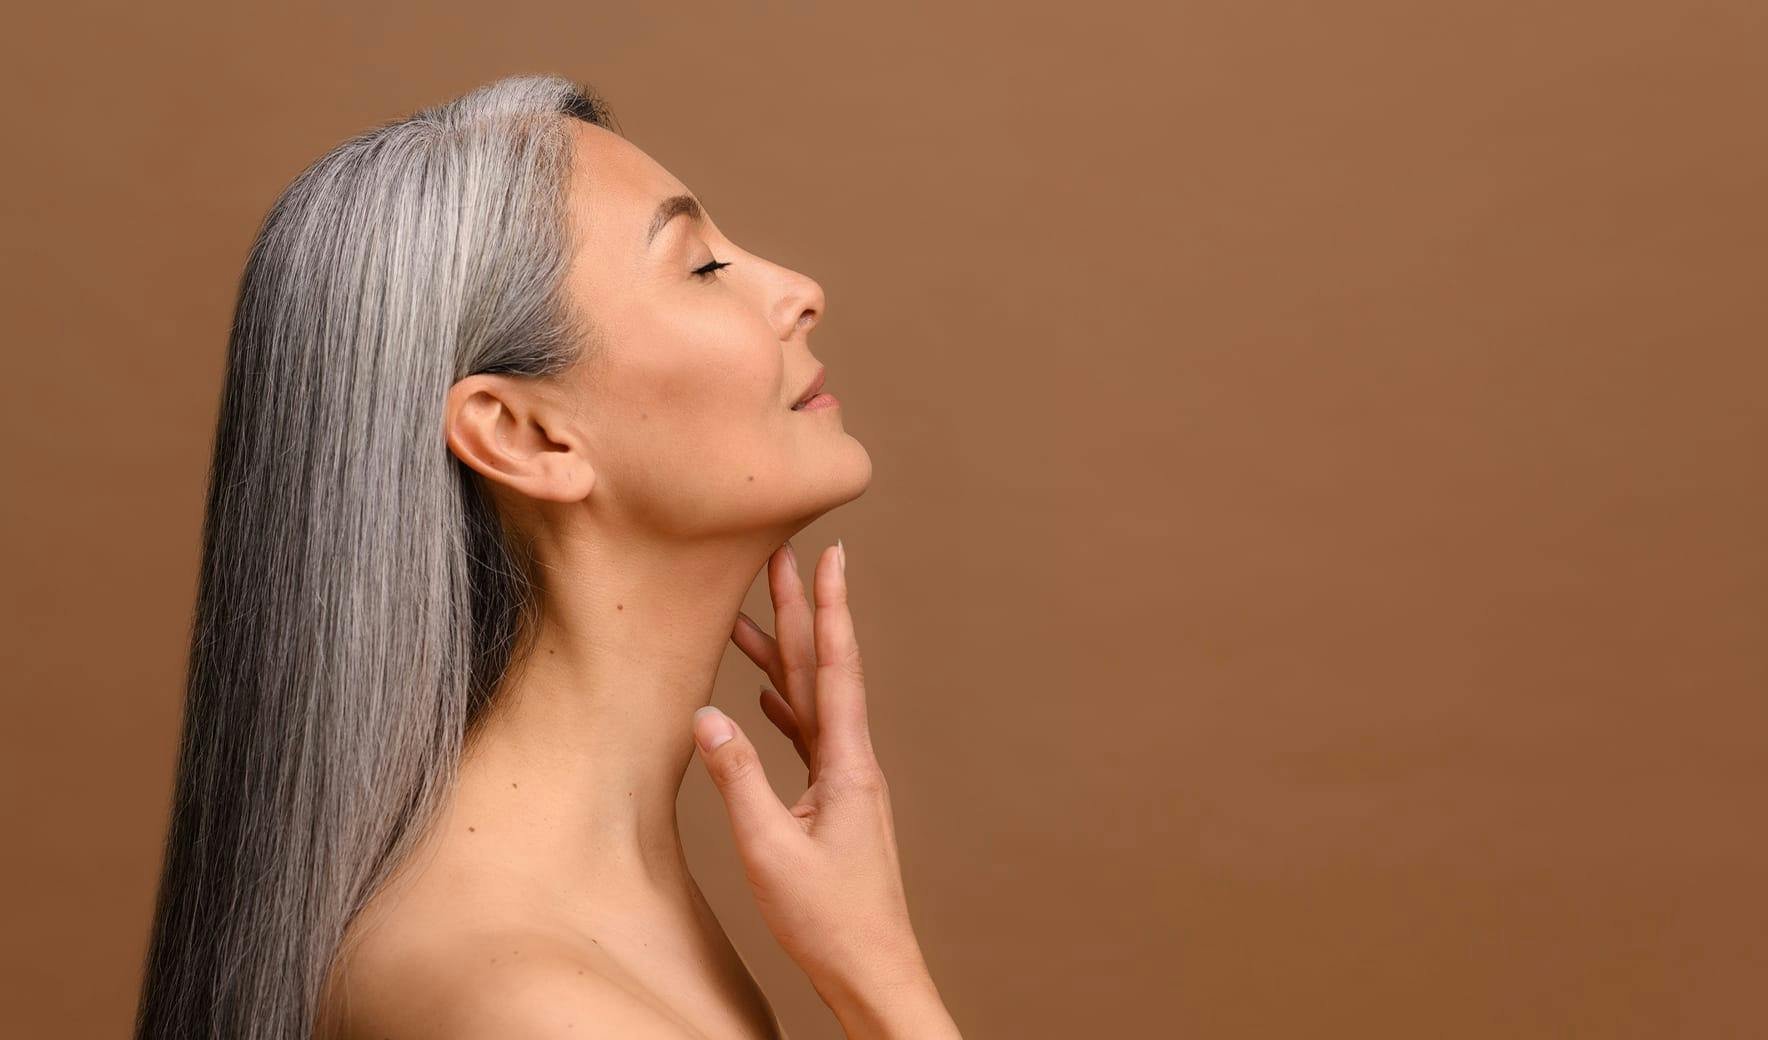 woman with gray hair touching her chin